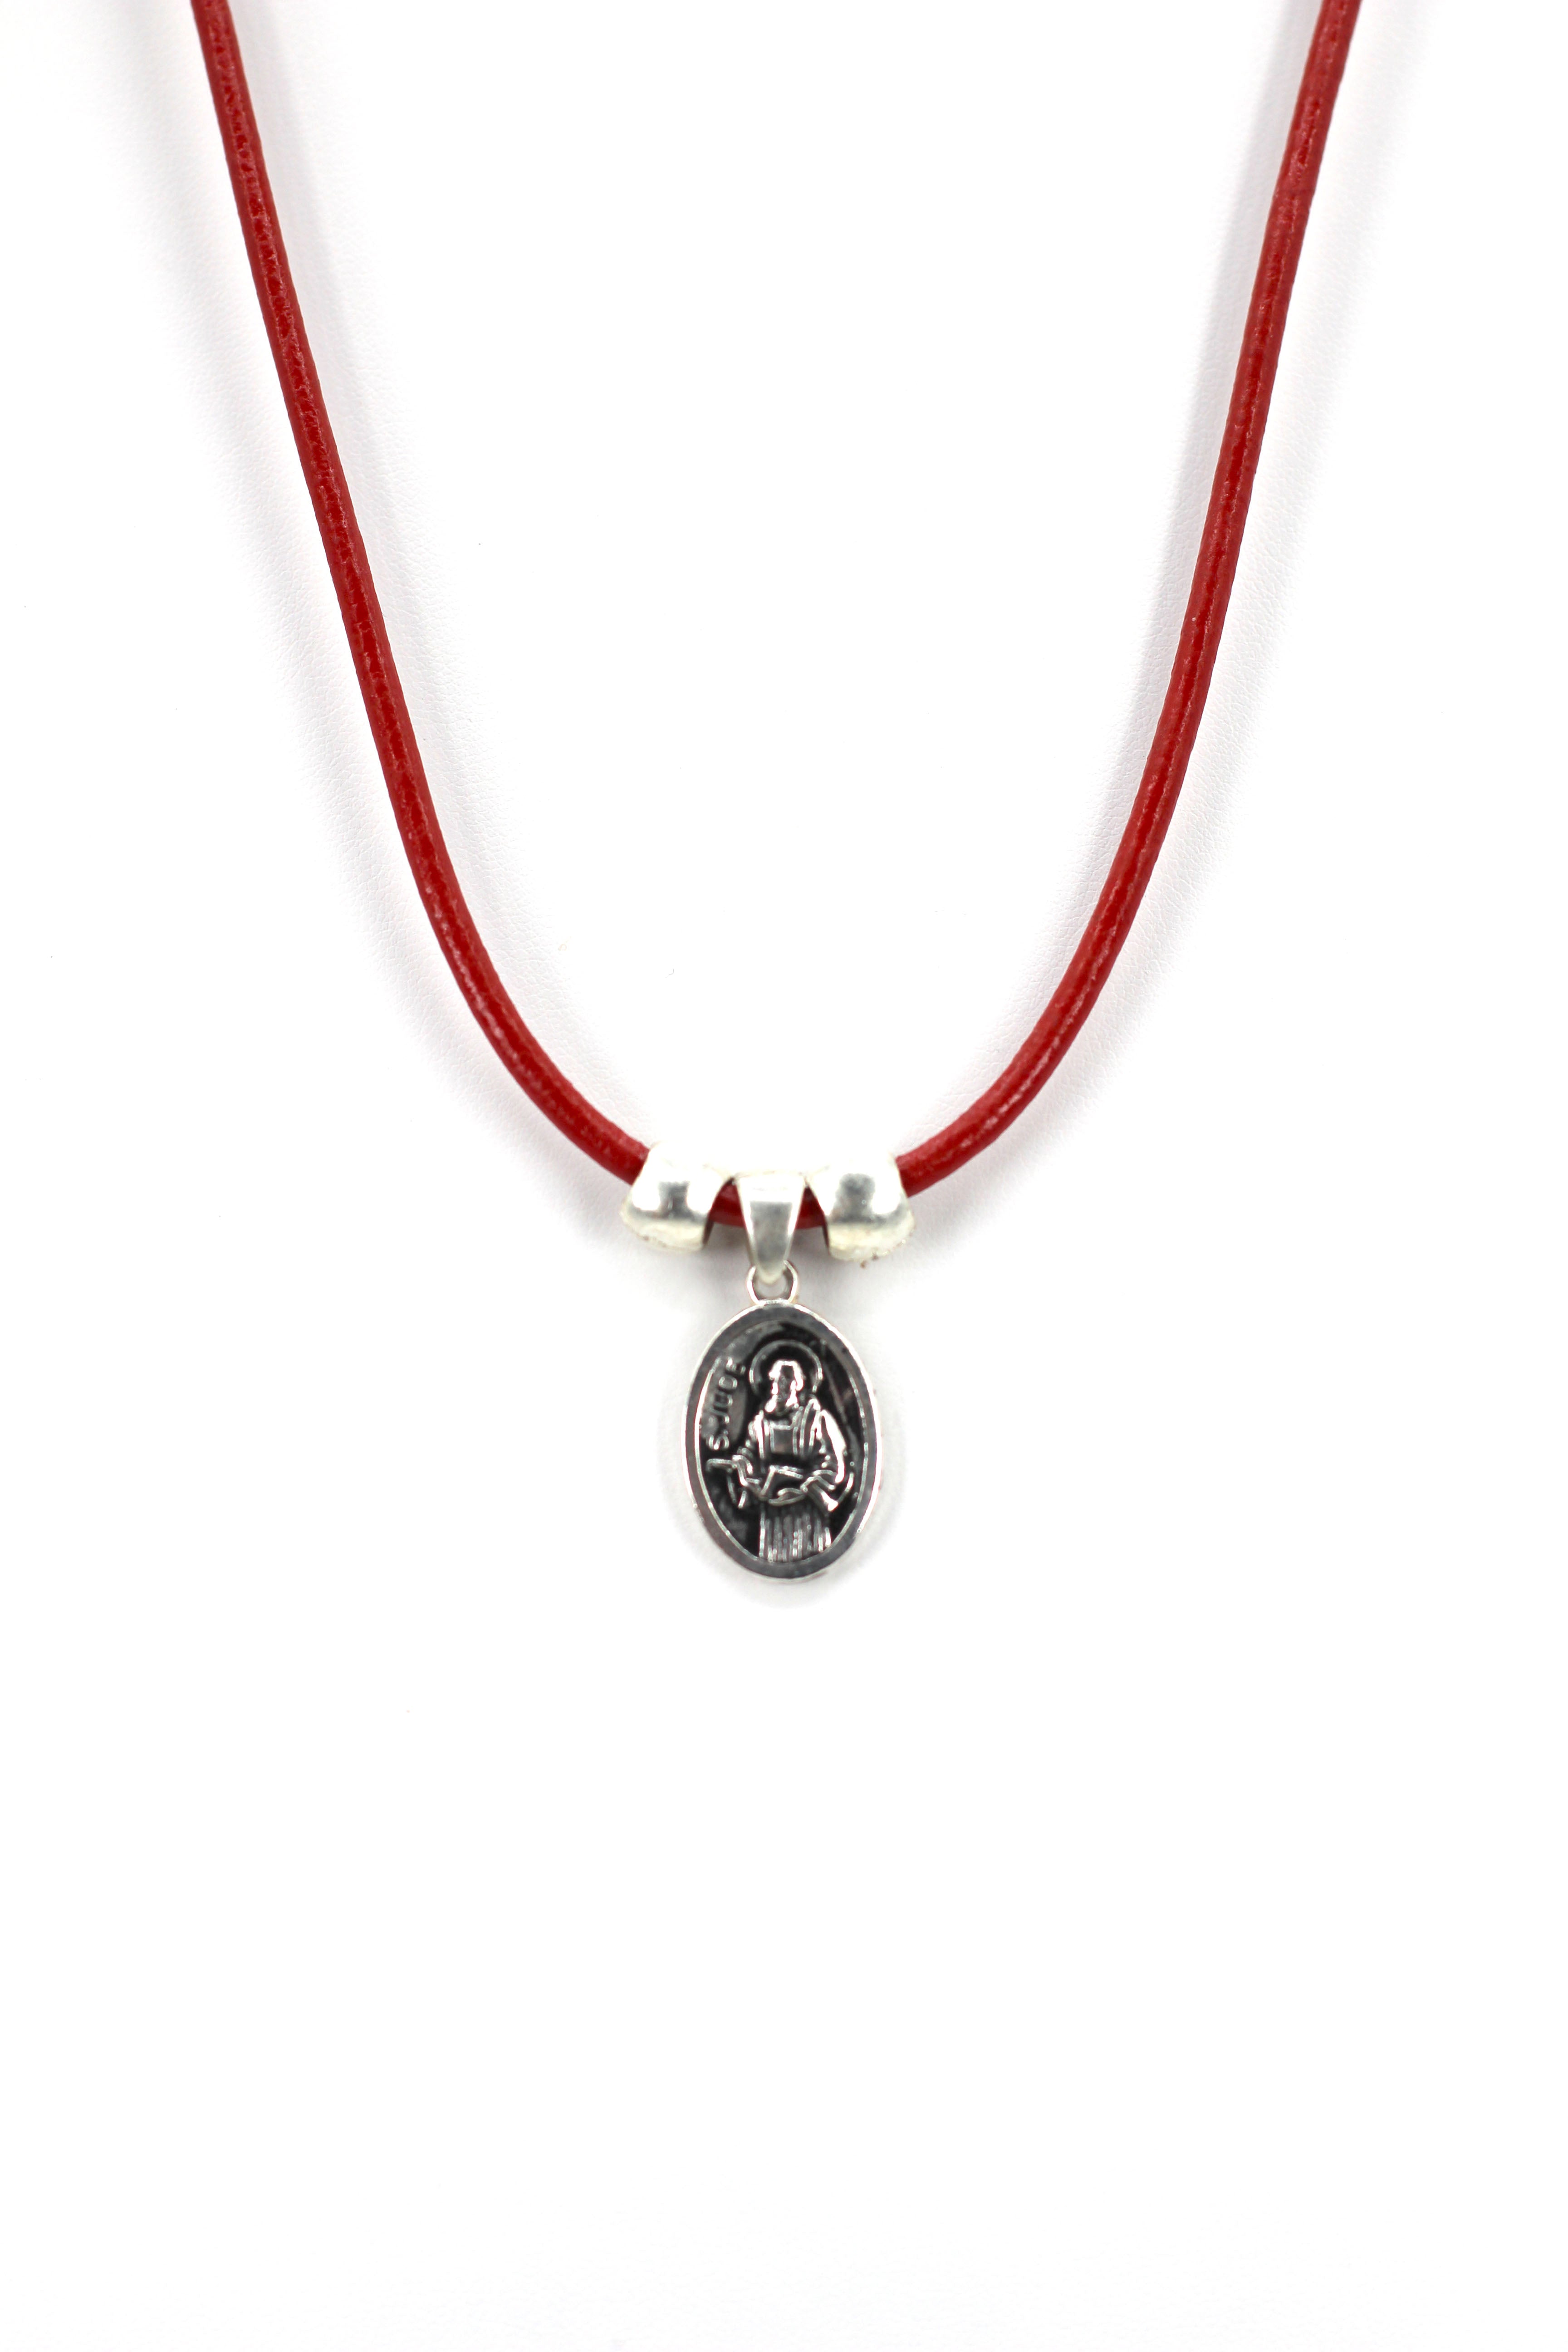 Vintage Necklace of Saint Jude Handmade Jewelry with Genuine Leather strap by Graciela's Collection